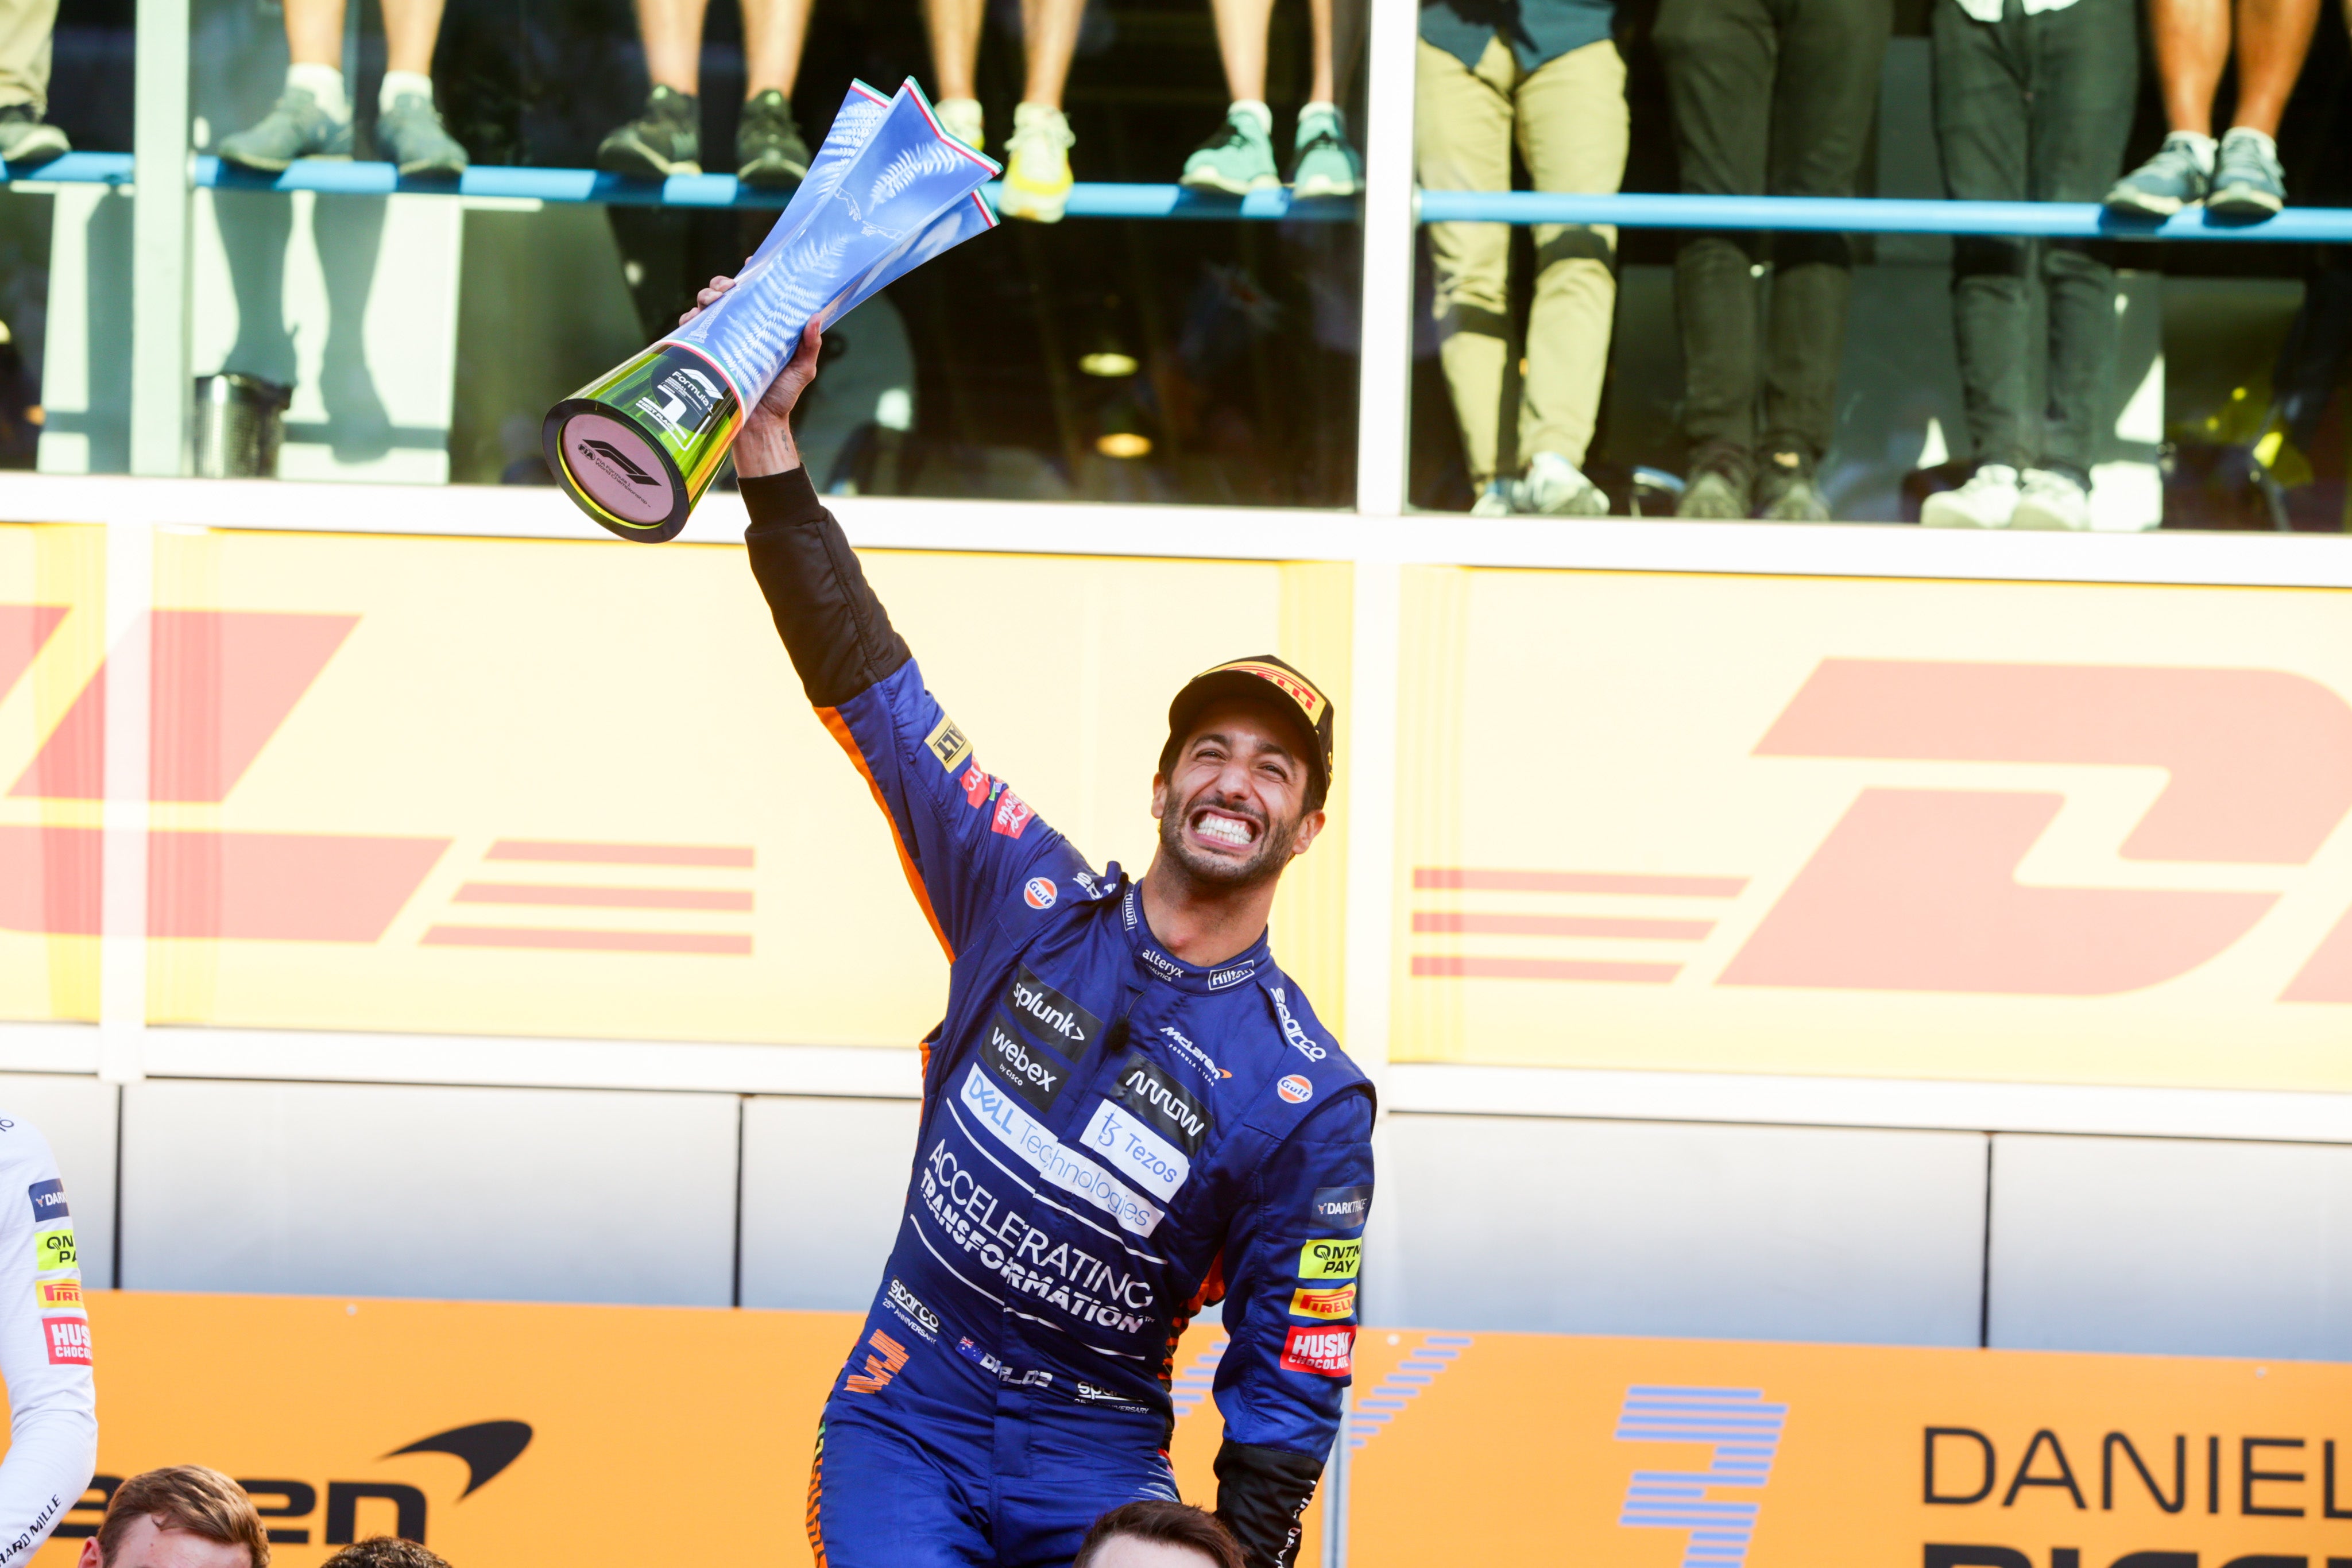 Daniel Ricciardo ended a nine-year drought for McLaren with victory at the Italian Grand Prix